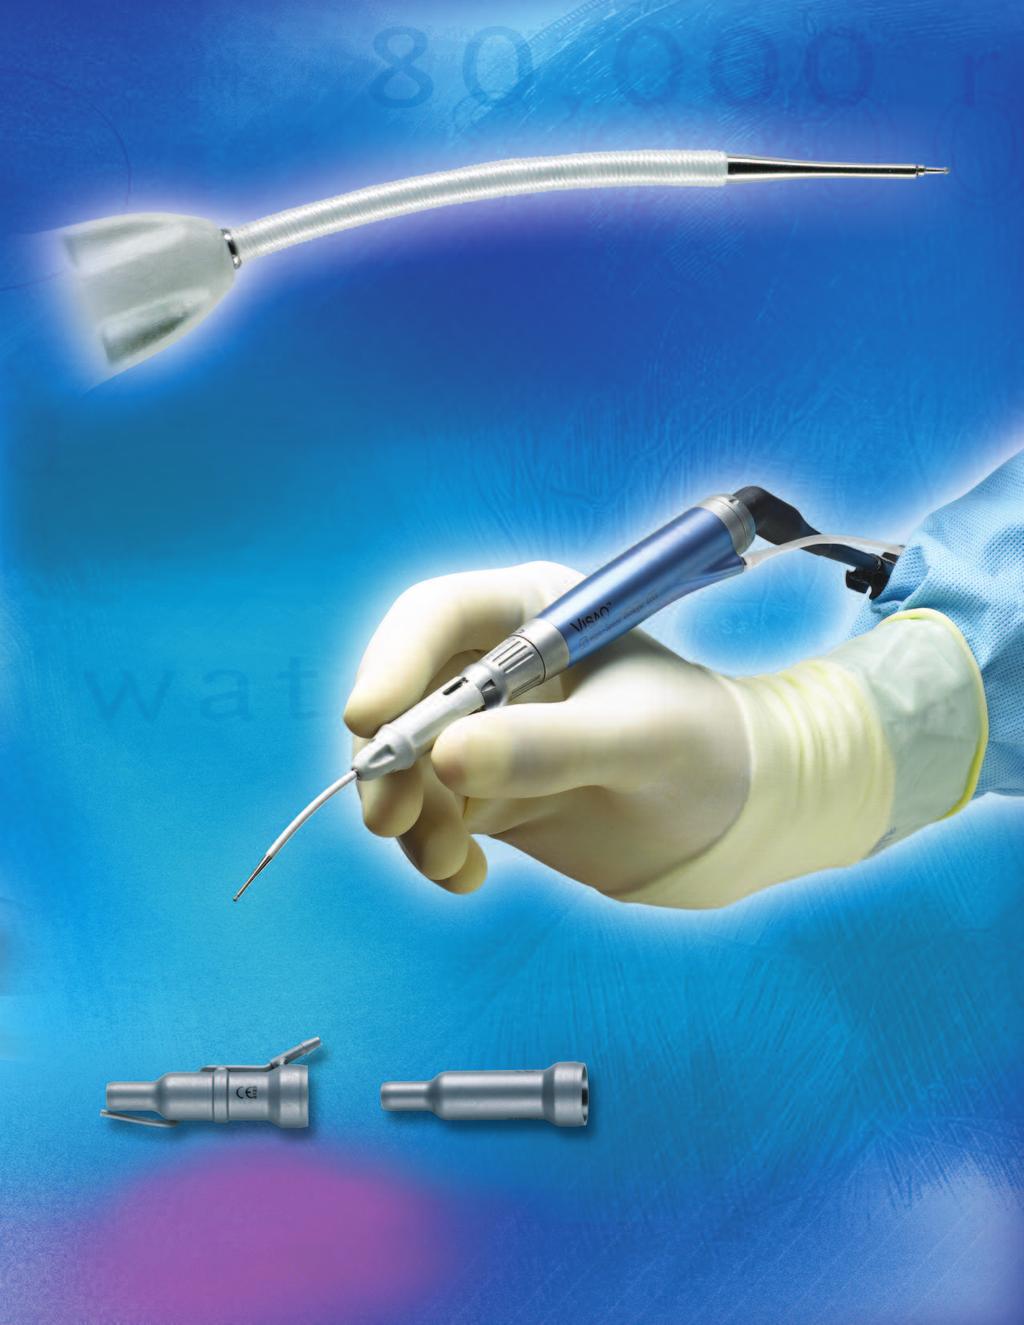 Created for neurotology 20 degree curved burs are specifically designed for working in tight, deep anatomic spaces Ergonomic Well-balanced and lightweight titanium body is easy to maneuver 33-3435